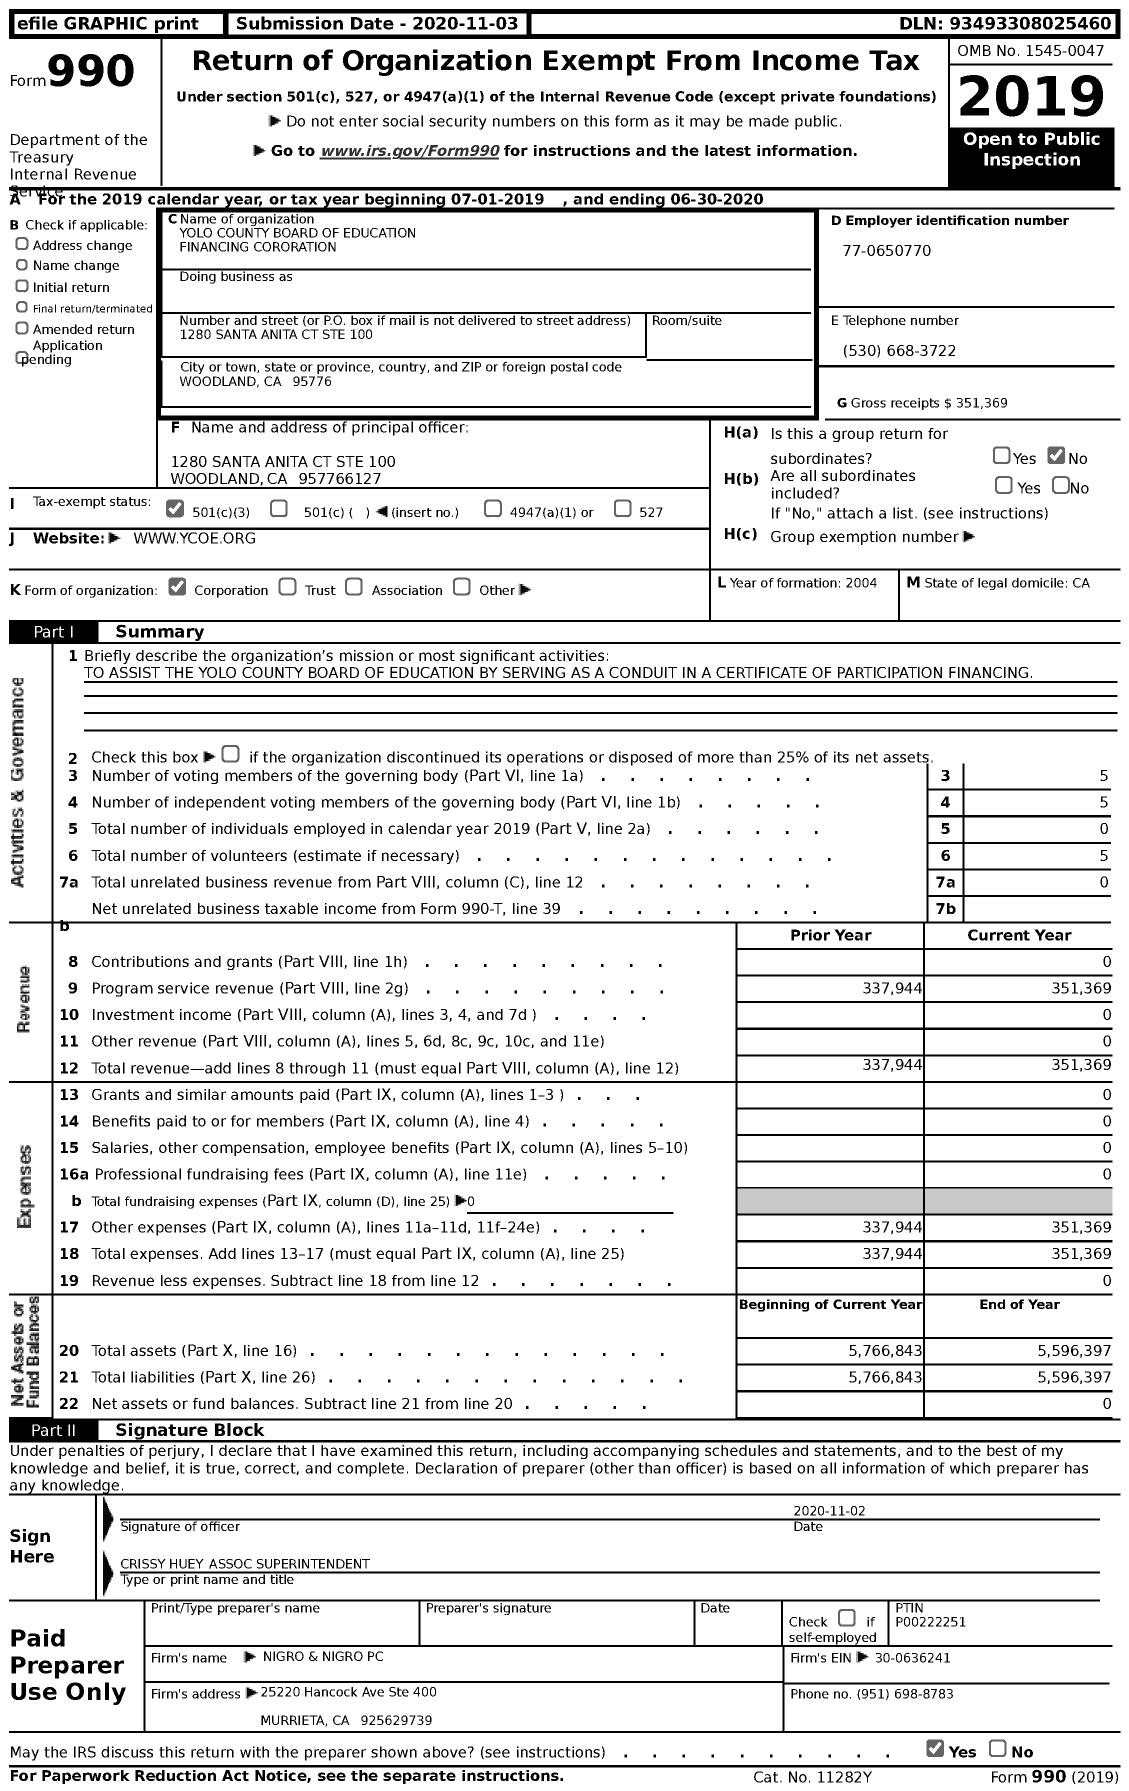 Image of first page of 2019 Form 990 for Yolo County Board of Education Financing Corporation